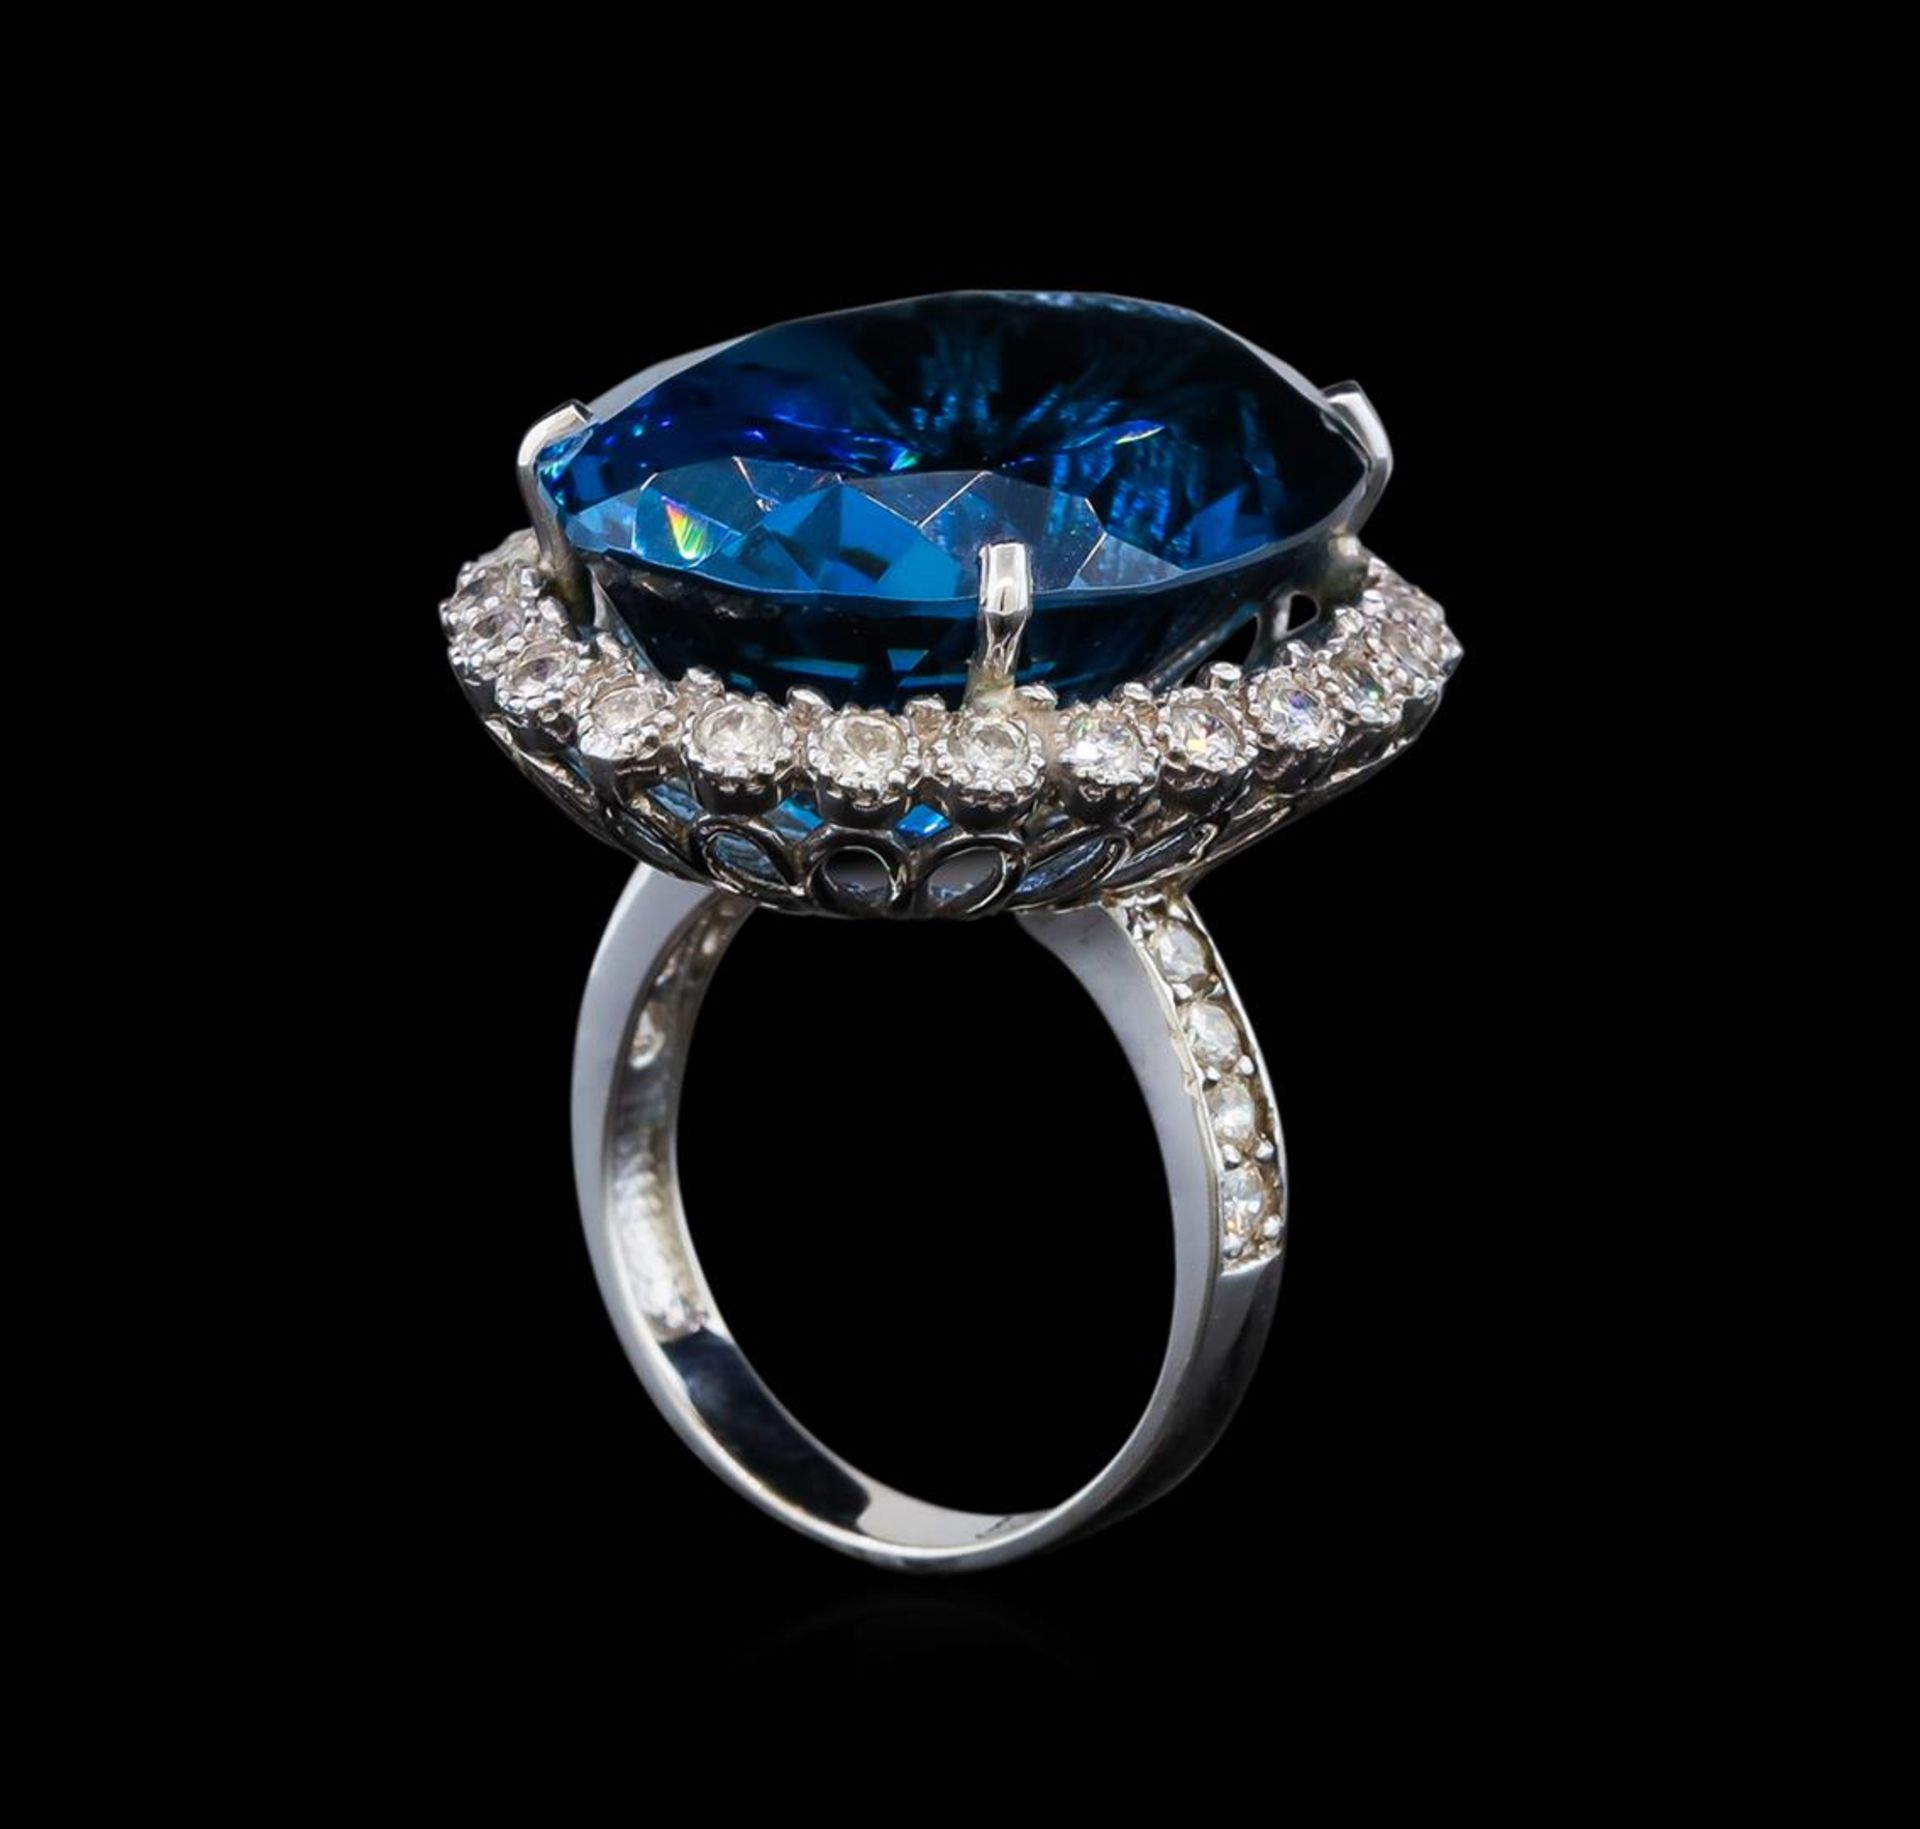 14KT White Gold 35.89 ctw Topaz and Diamond Ring - Image 4 of 5